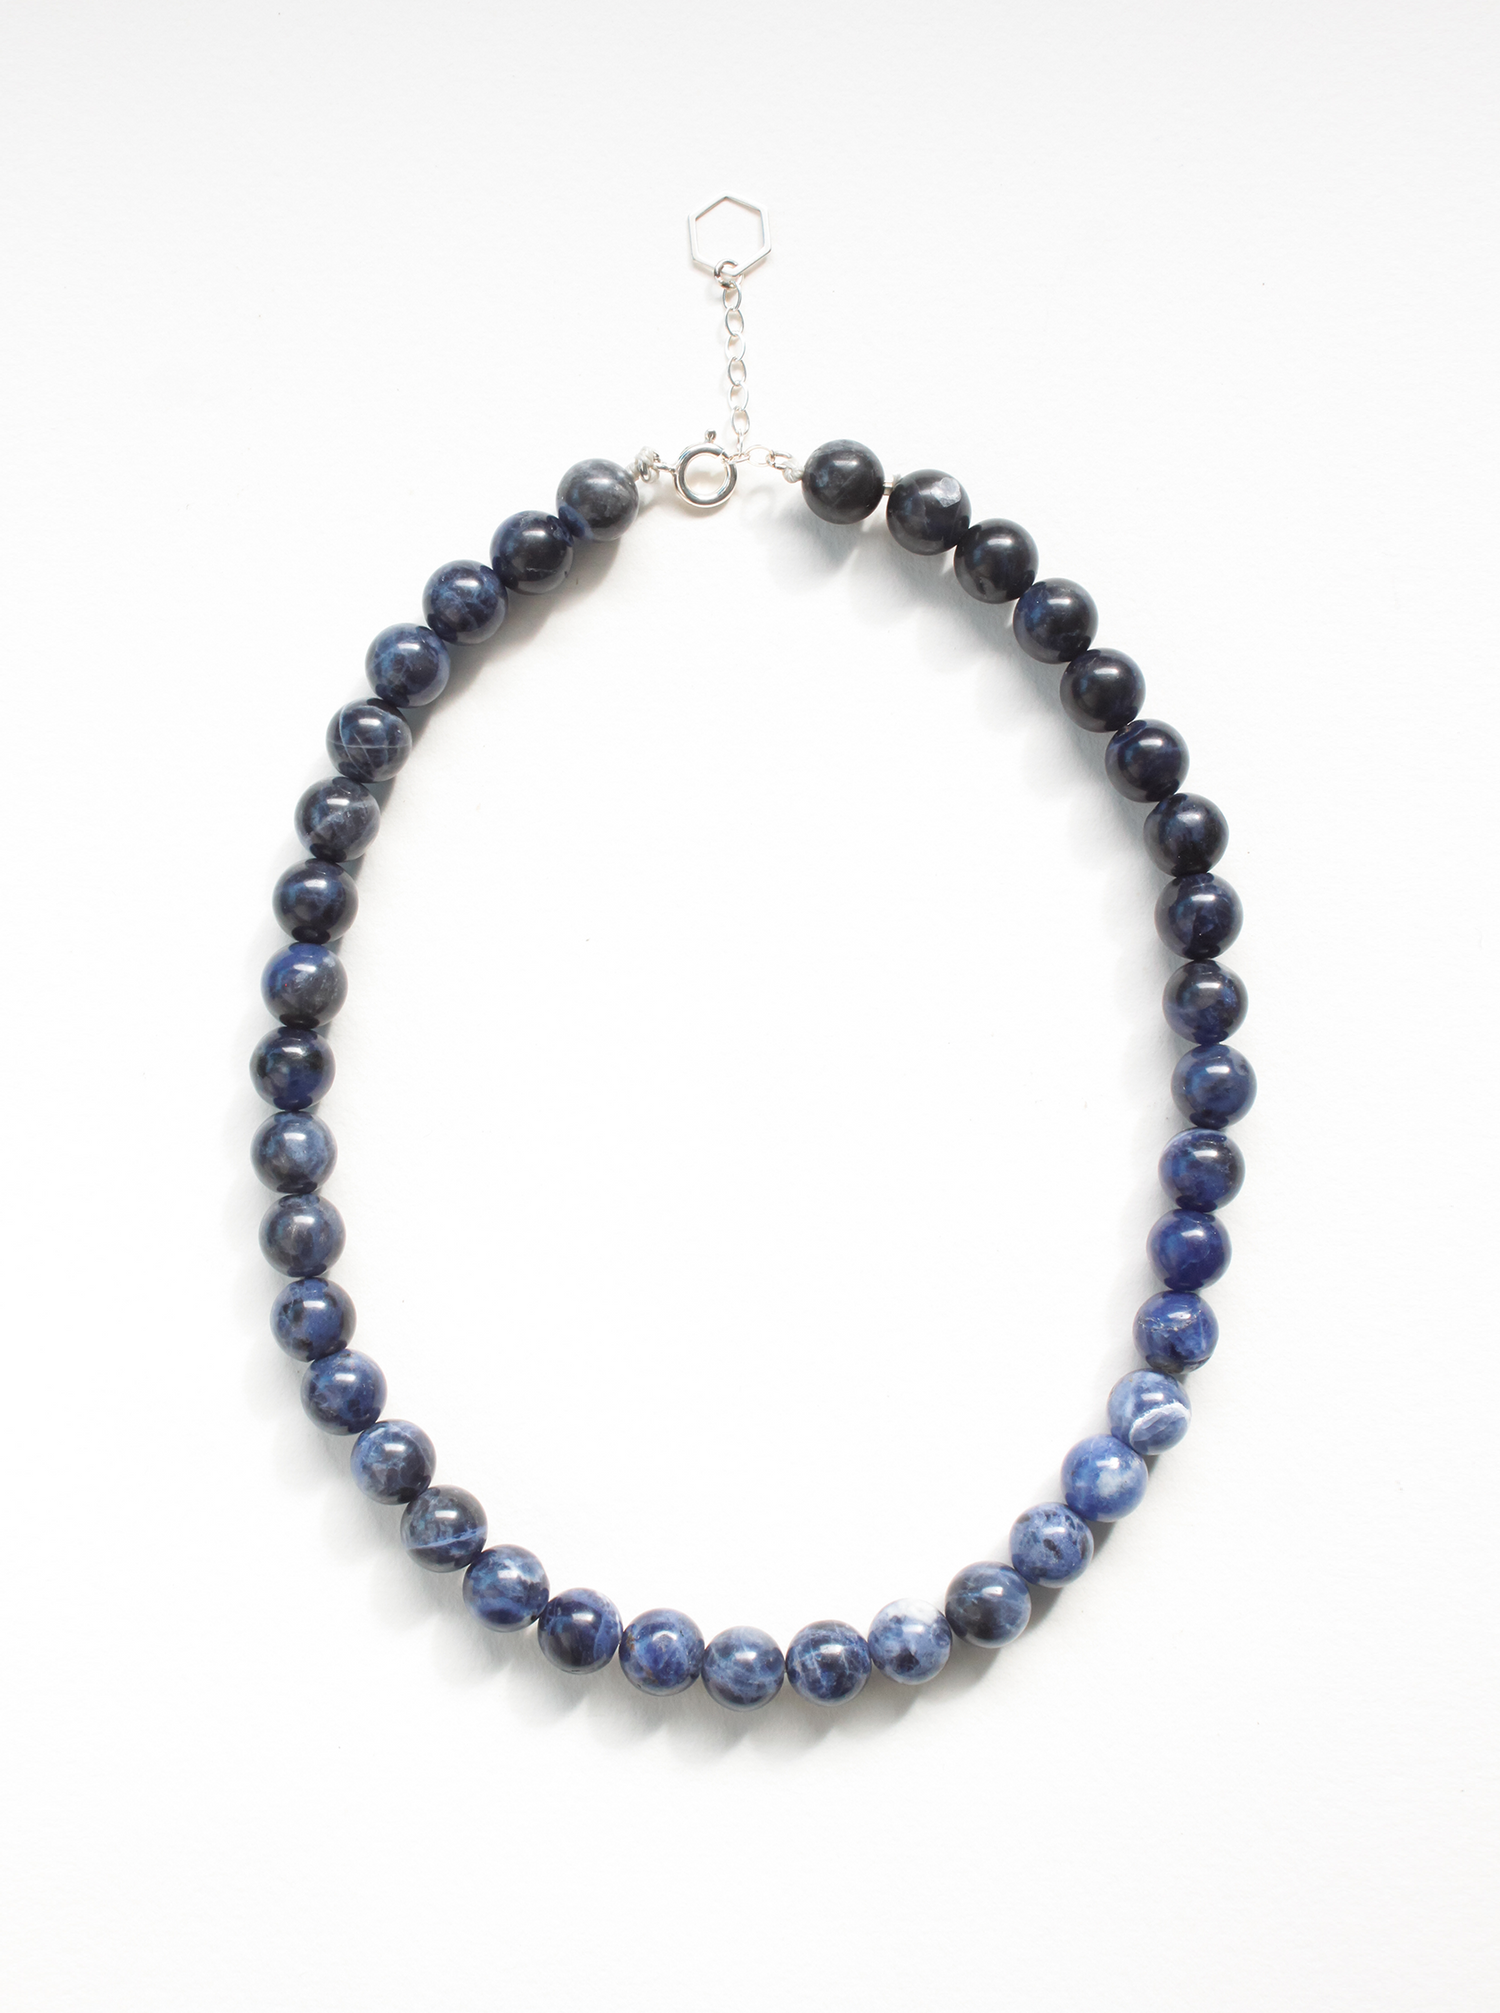 Stone Necklace - Blue Sodalite 10mm